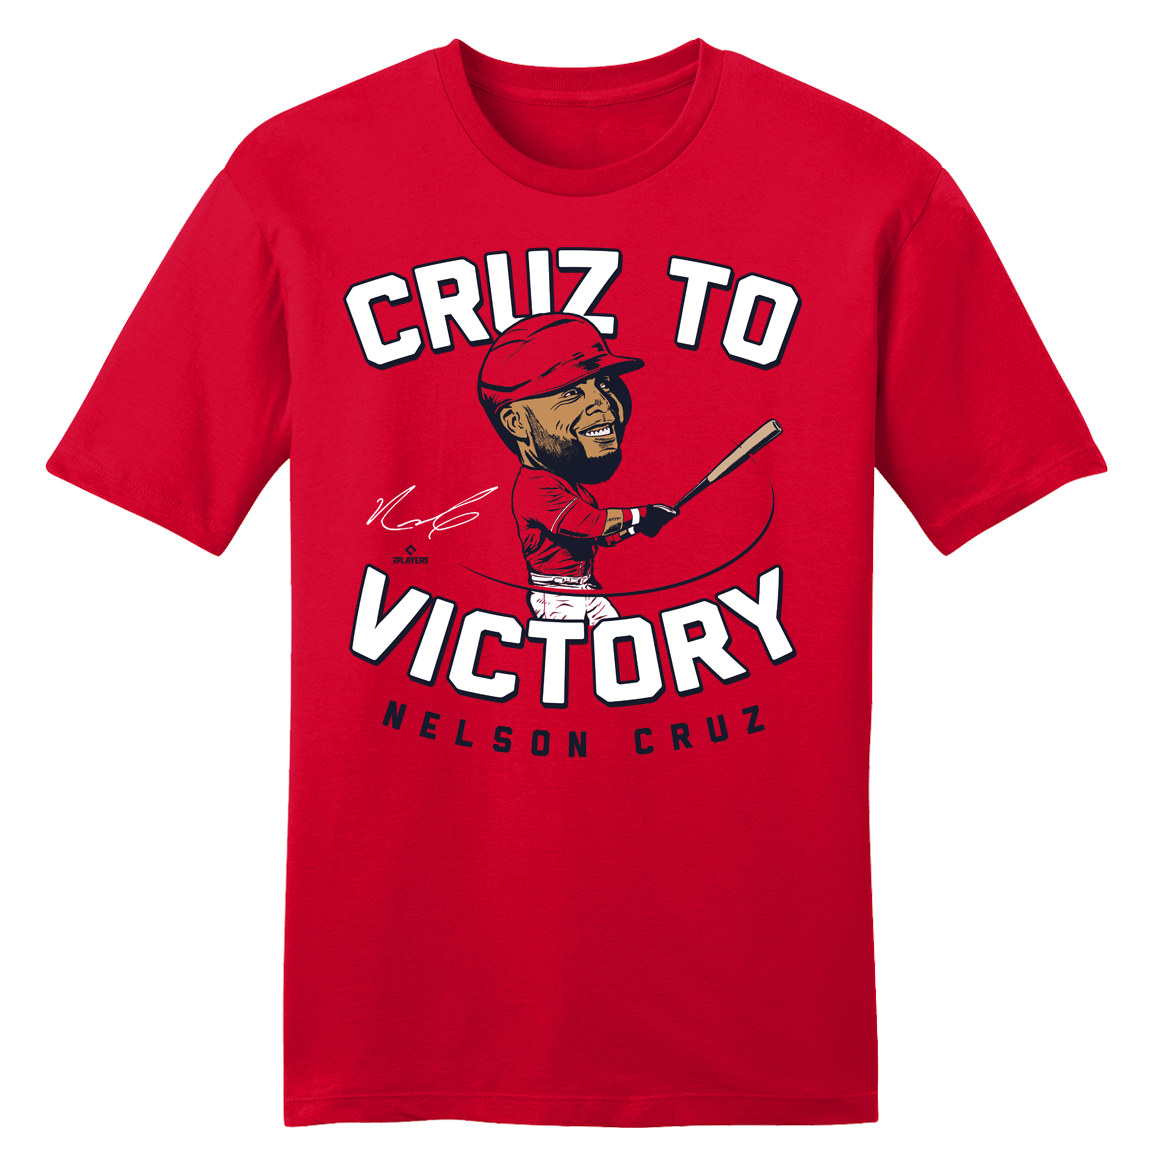 Nelson Cruz to Victory Official MLBPA Tee